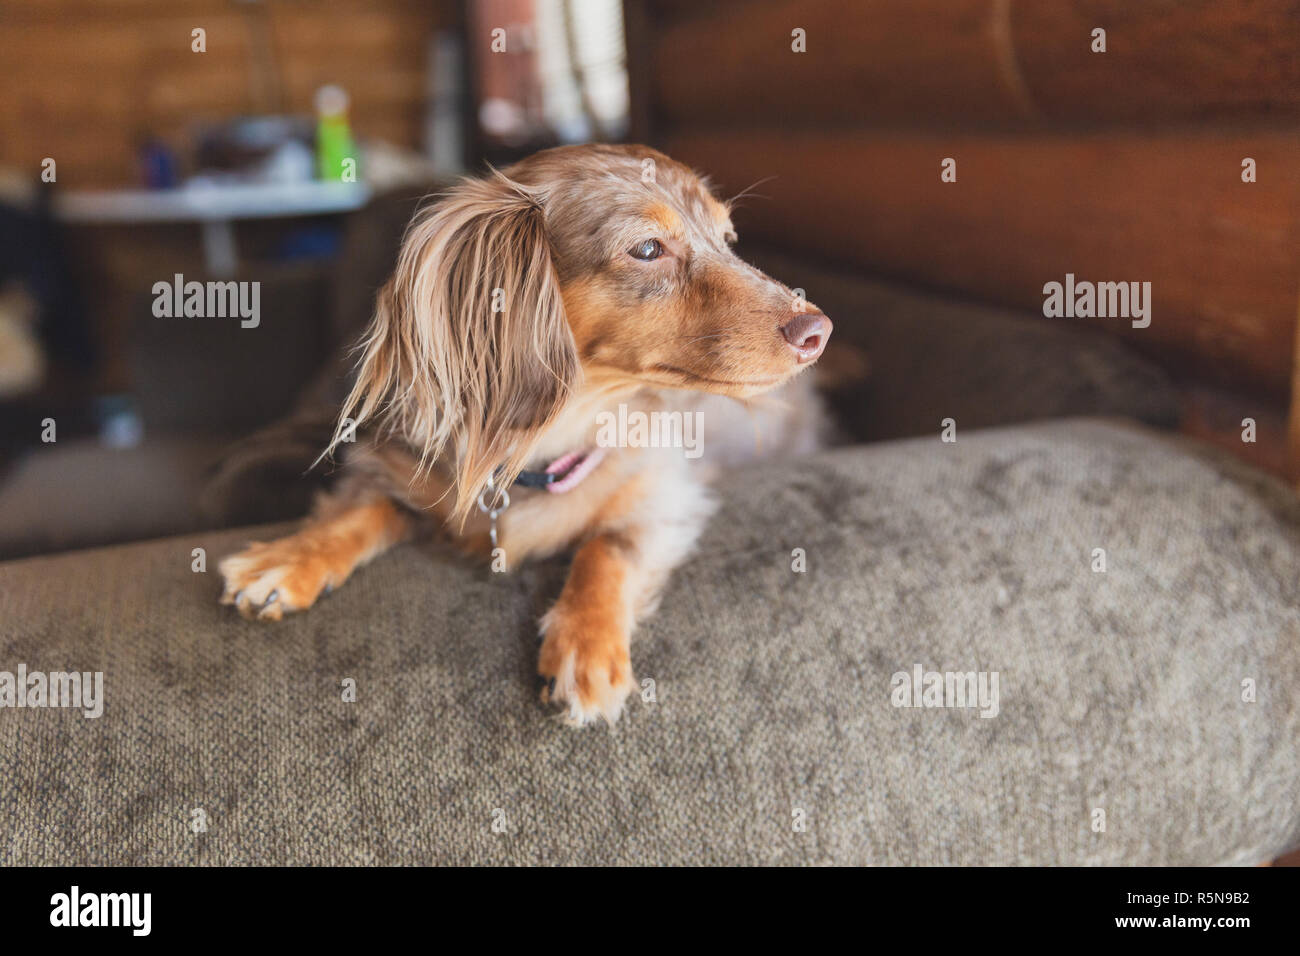 Miniature dapple dachshund with long fur sitting on a couch and looking outside. Dog is waiting for its owner. Stock Photo